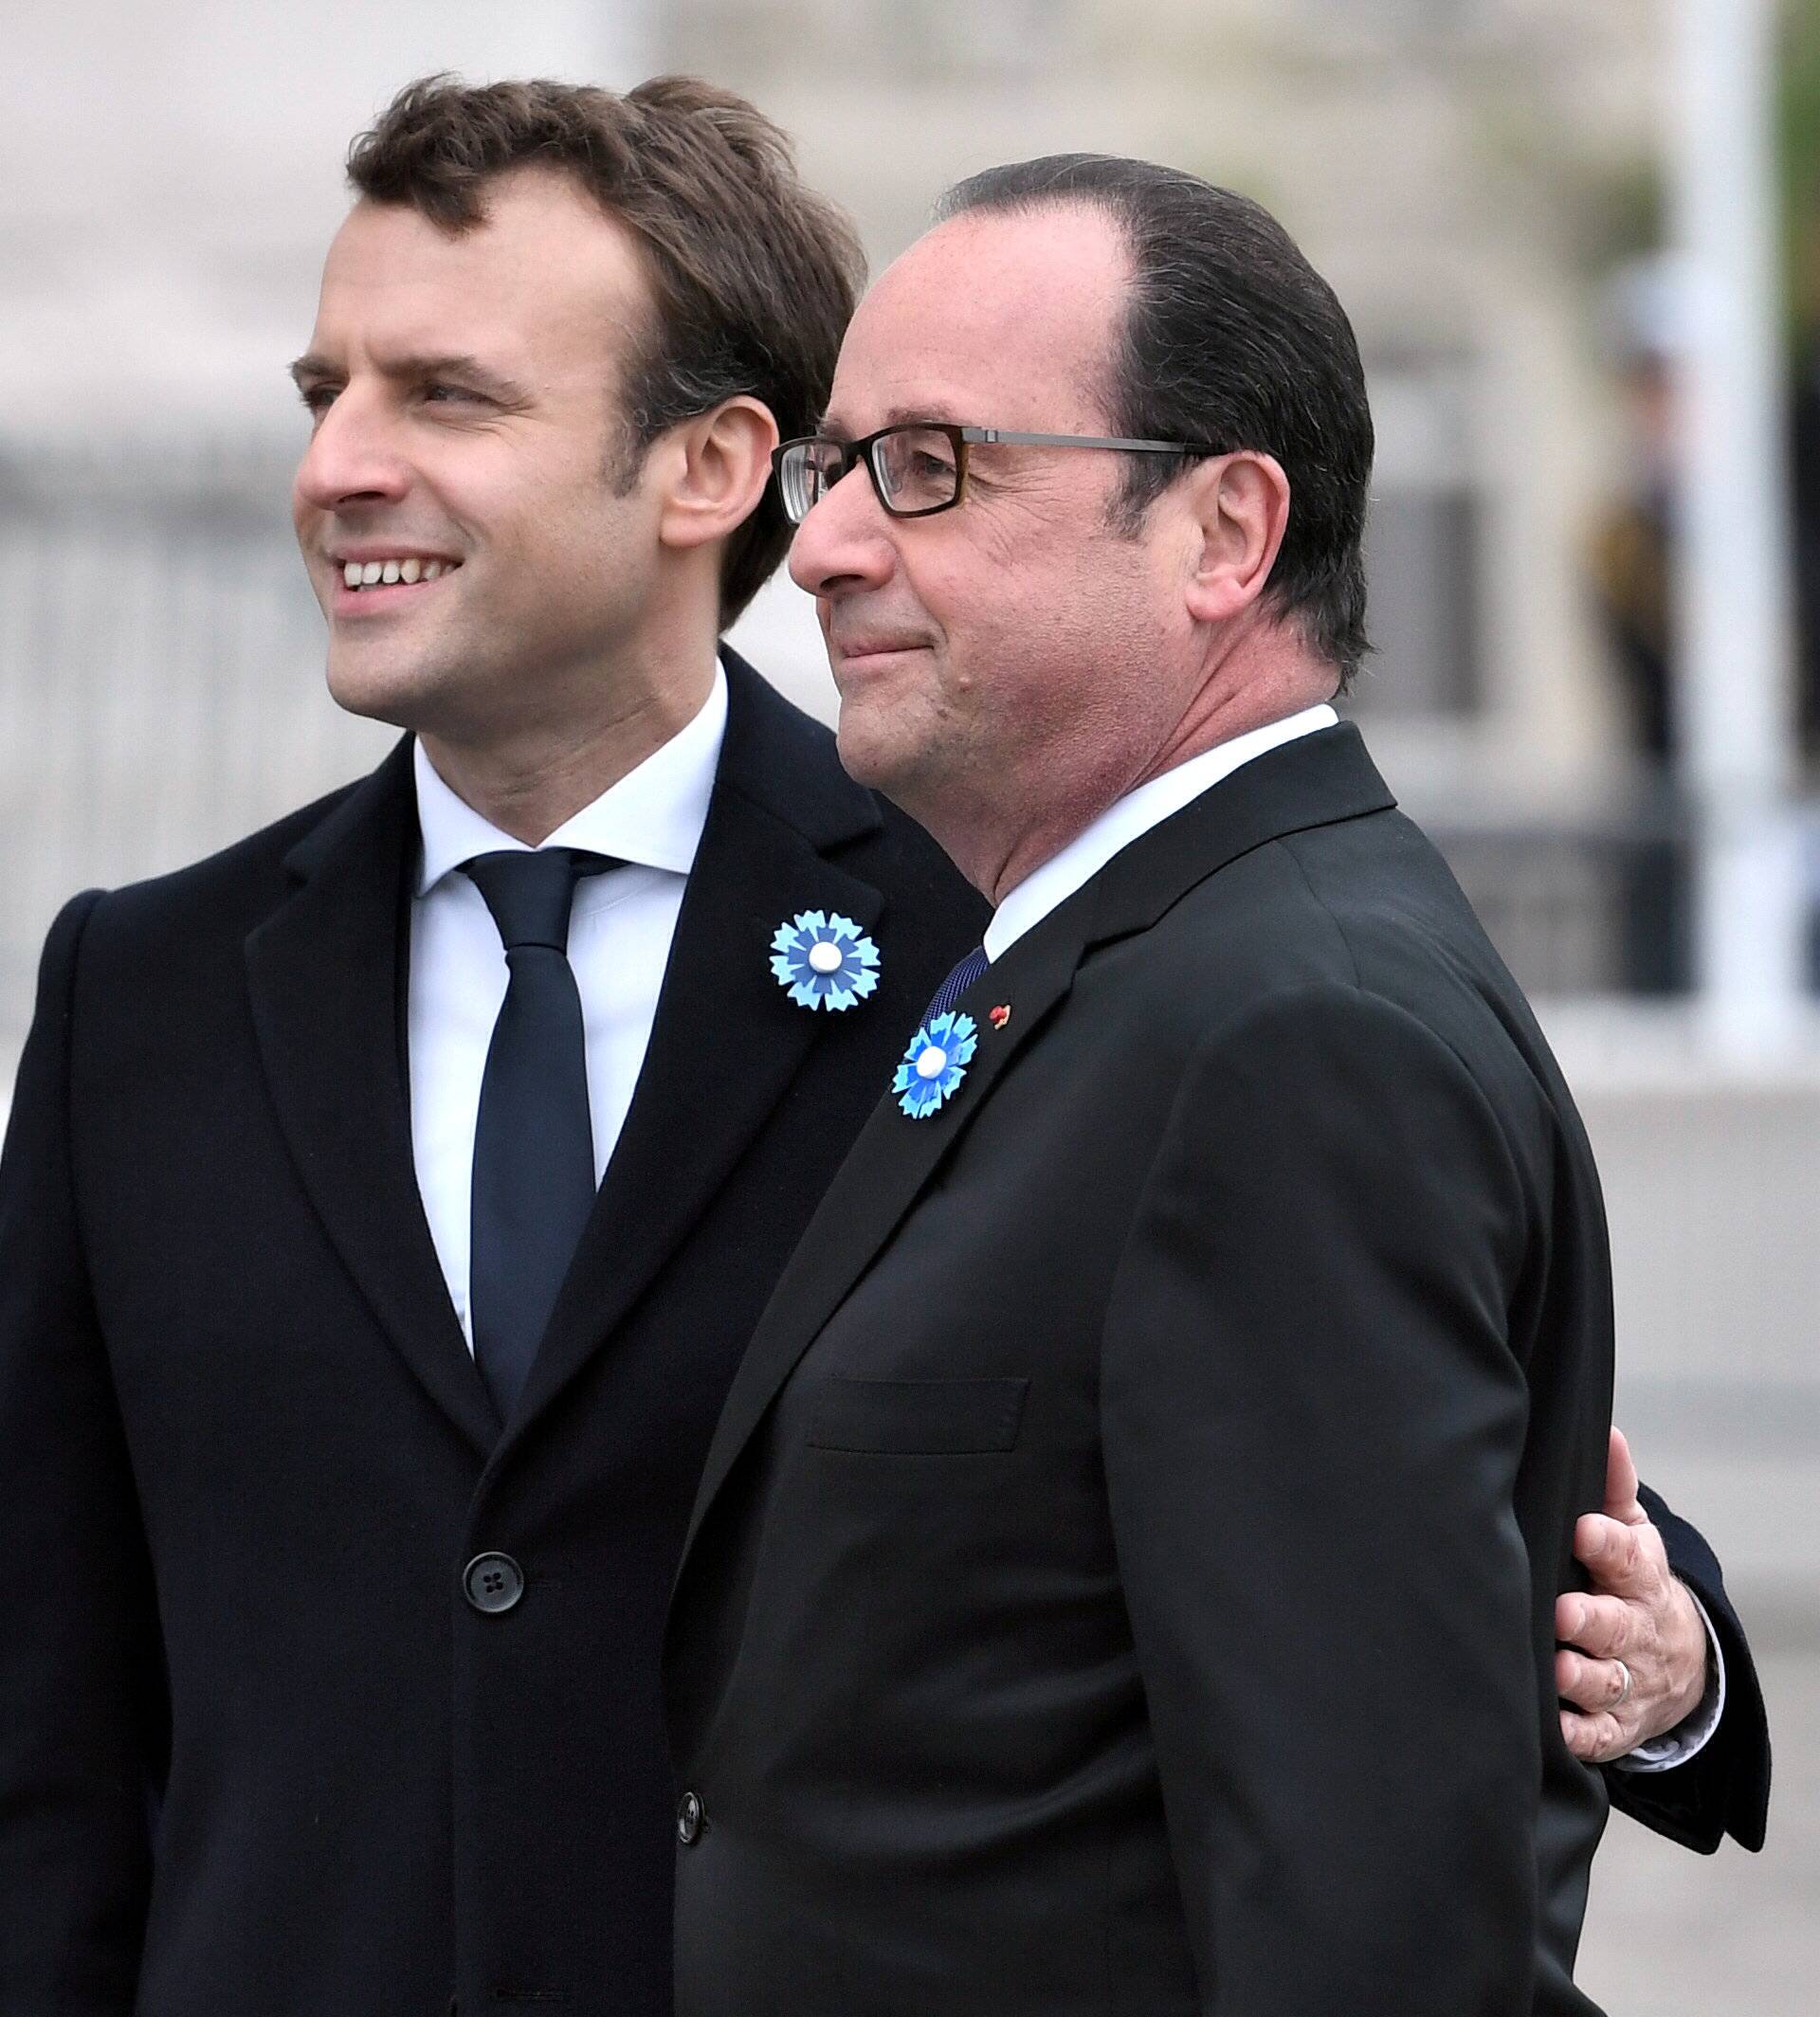 Outgoing French President Hollande and President-elect Macron attend a ceremony to mark the end of World War II at the Tomb of the Unknown Soldier at the Arc de Triomphe in Paris